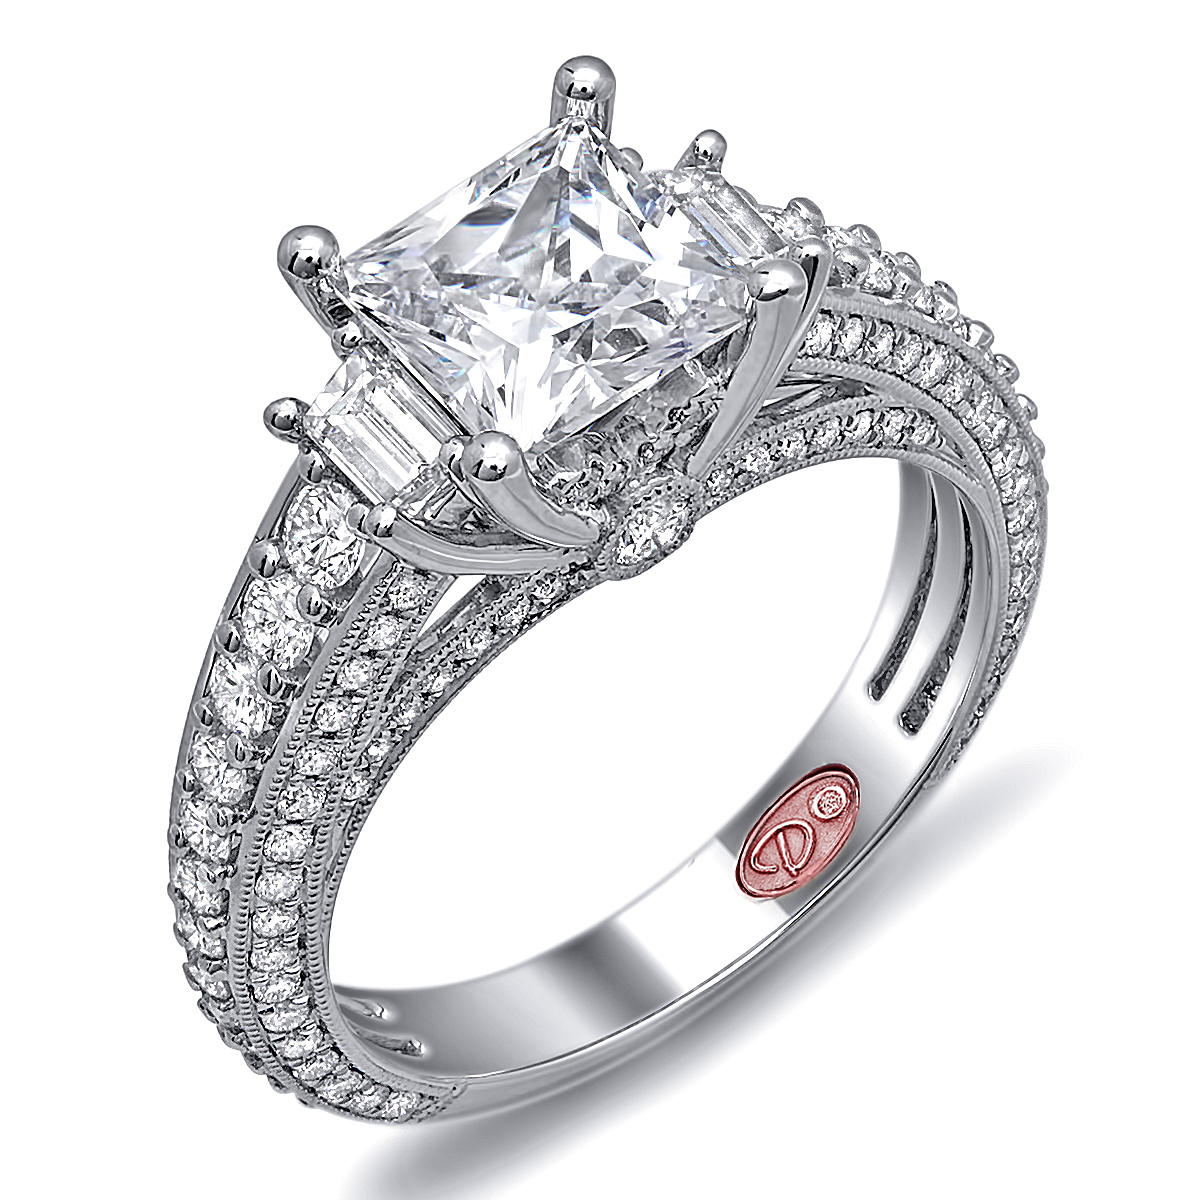 Designer Engagement Rings and Bridal Jewelry